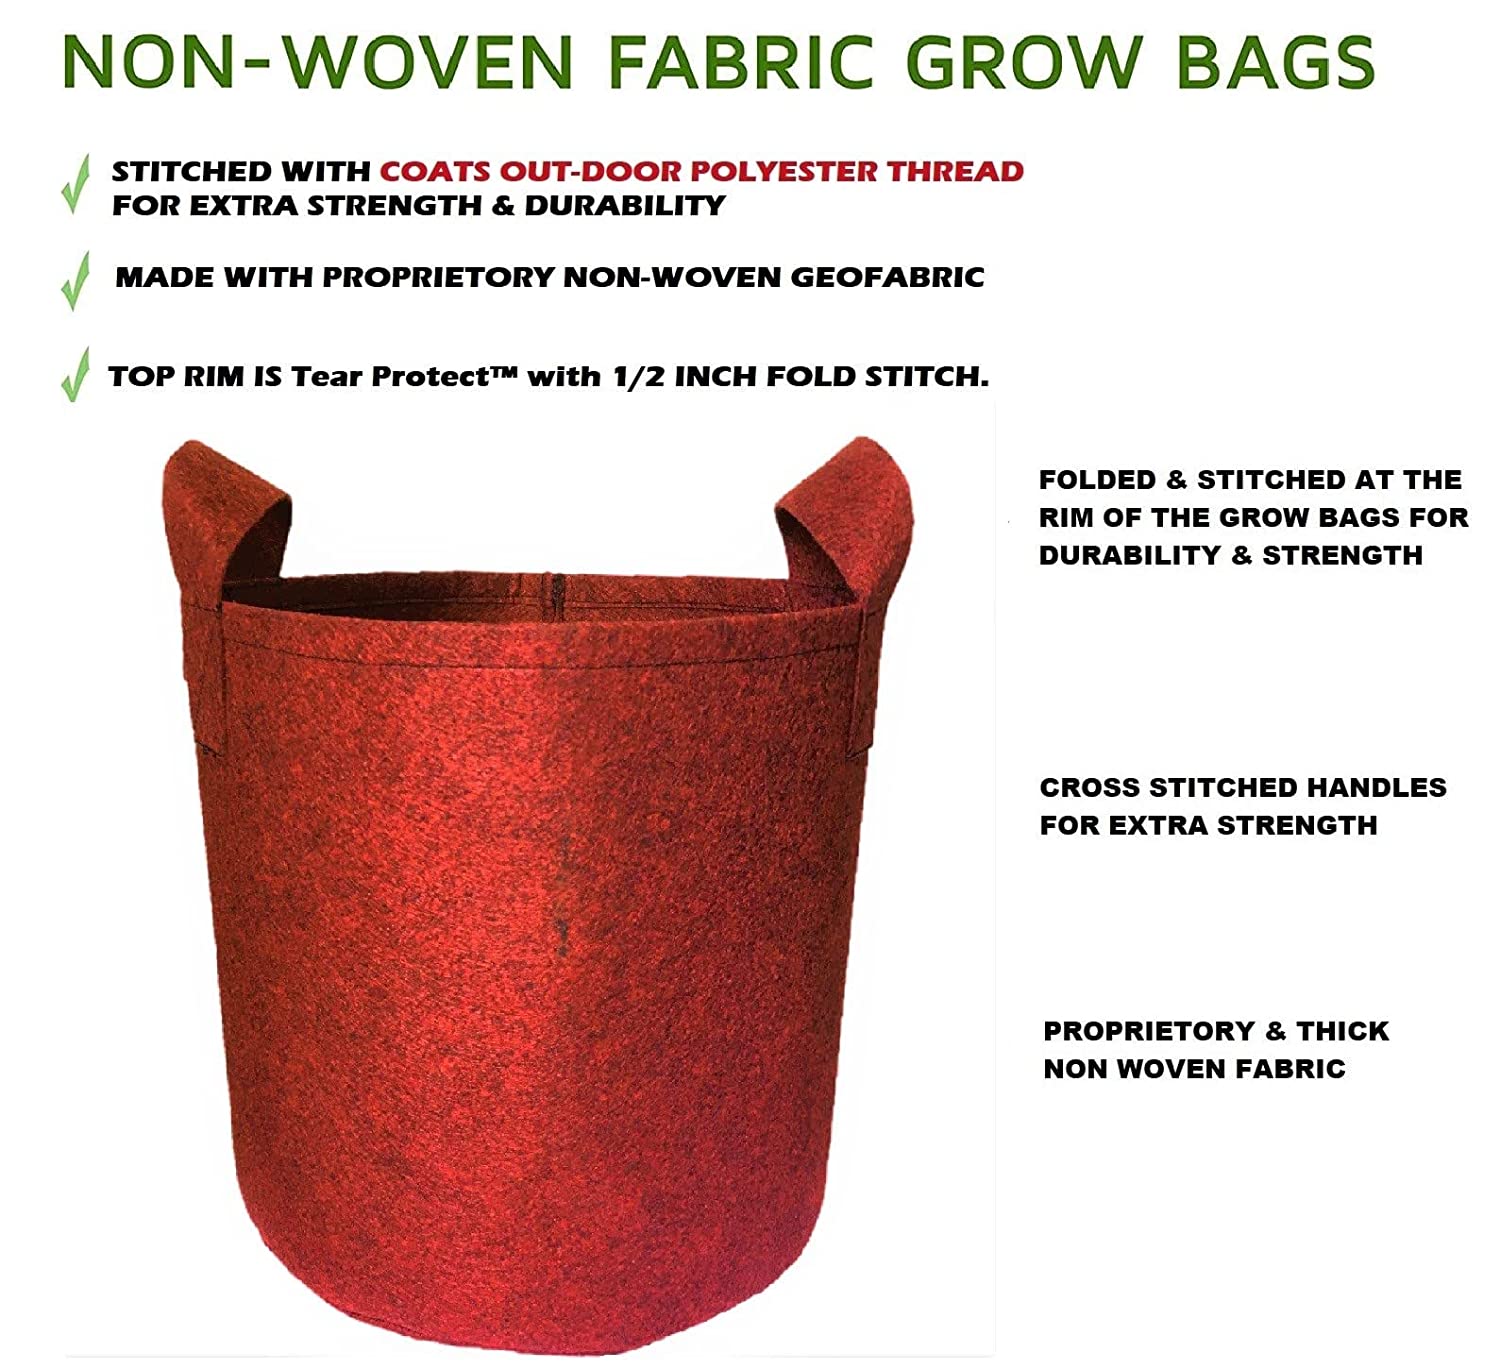 Oxypot Fabric Grow Bags 350 GSM (5 Gallons), 12 X 12 Inches- Pack of 5